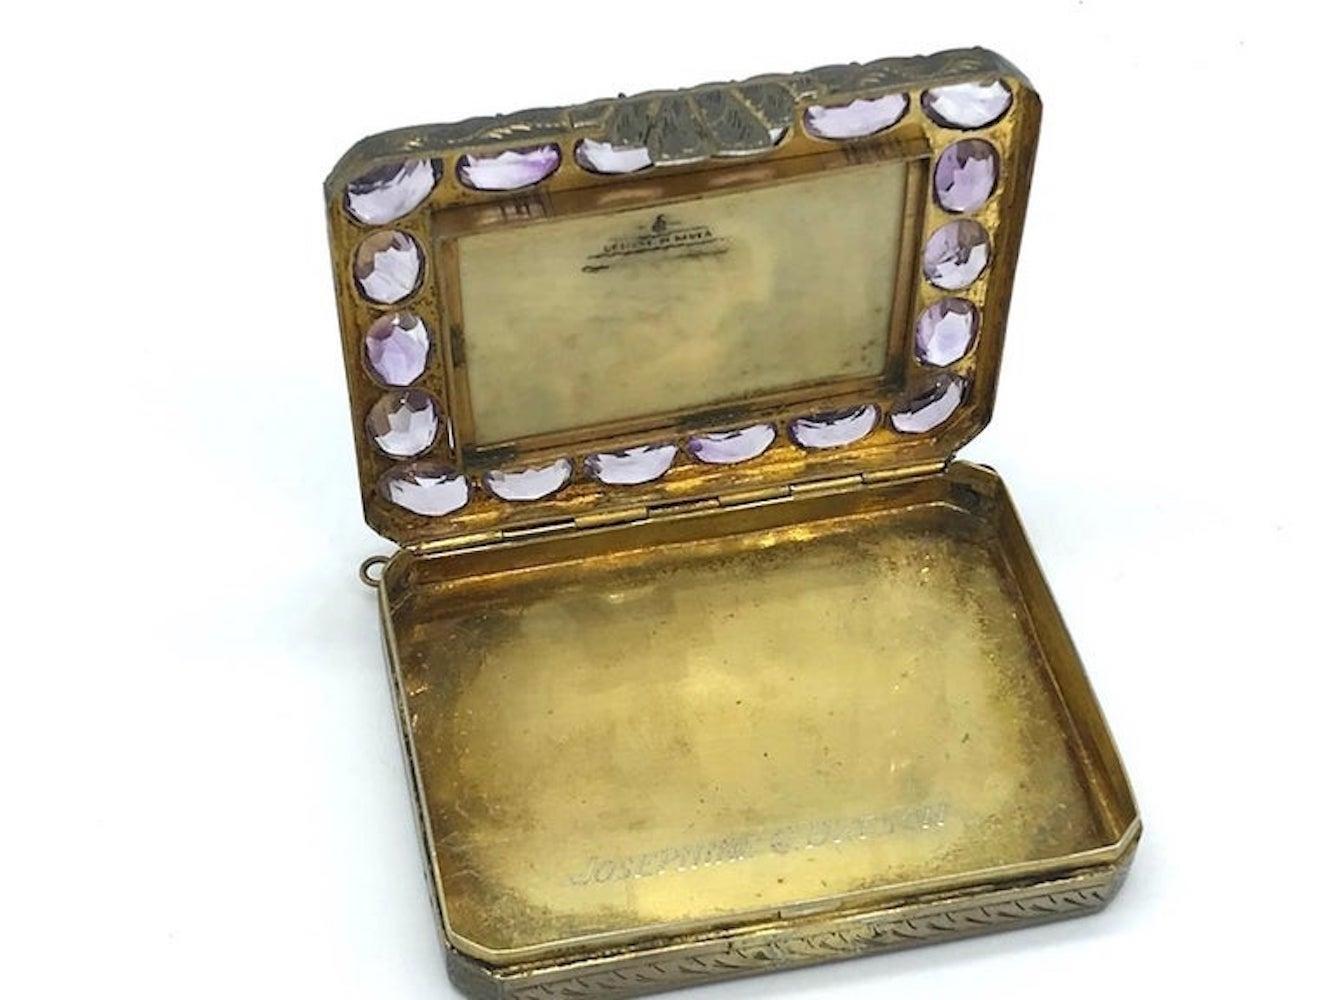 Renaissance 36 carat Amethyst Compact Vanity Box or Necklace 
Rare find 3.5 x 2.75 inch metal box with Hand Painting picture of 17th Century is signed by artist.

 Excellent colors and artistry surrounded by 18 oval shaped amethyst gemstones. The